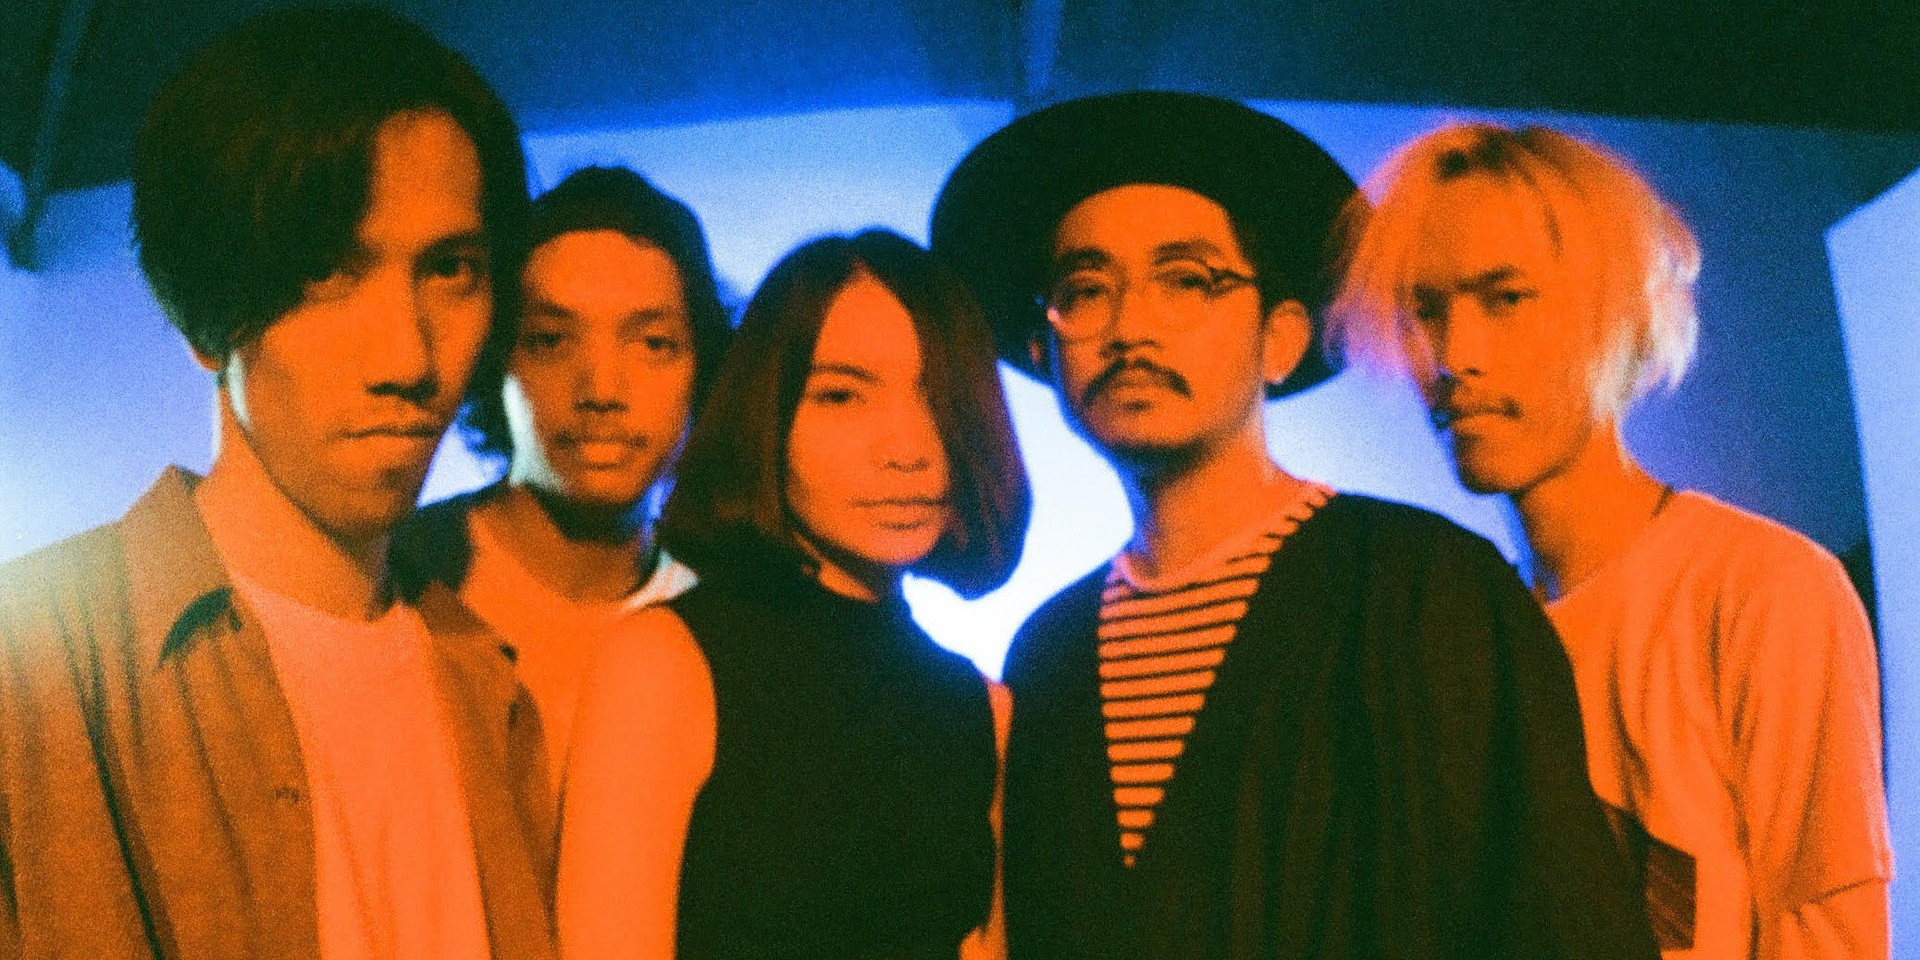 WATCH: Shoegaze band Heals release video for their latest single 'False Alarm'